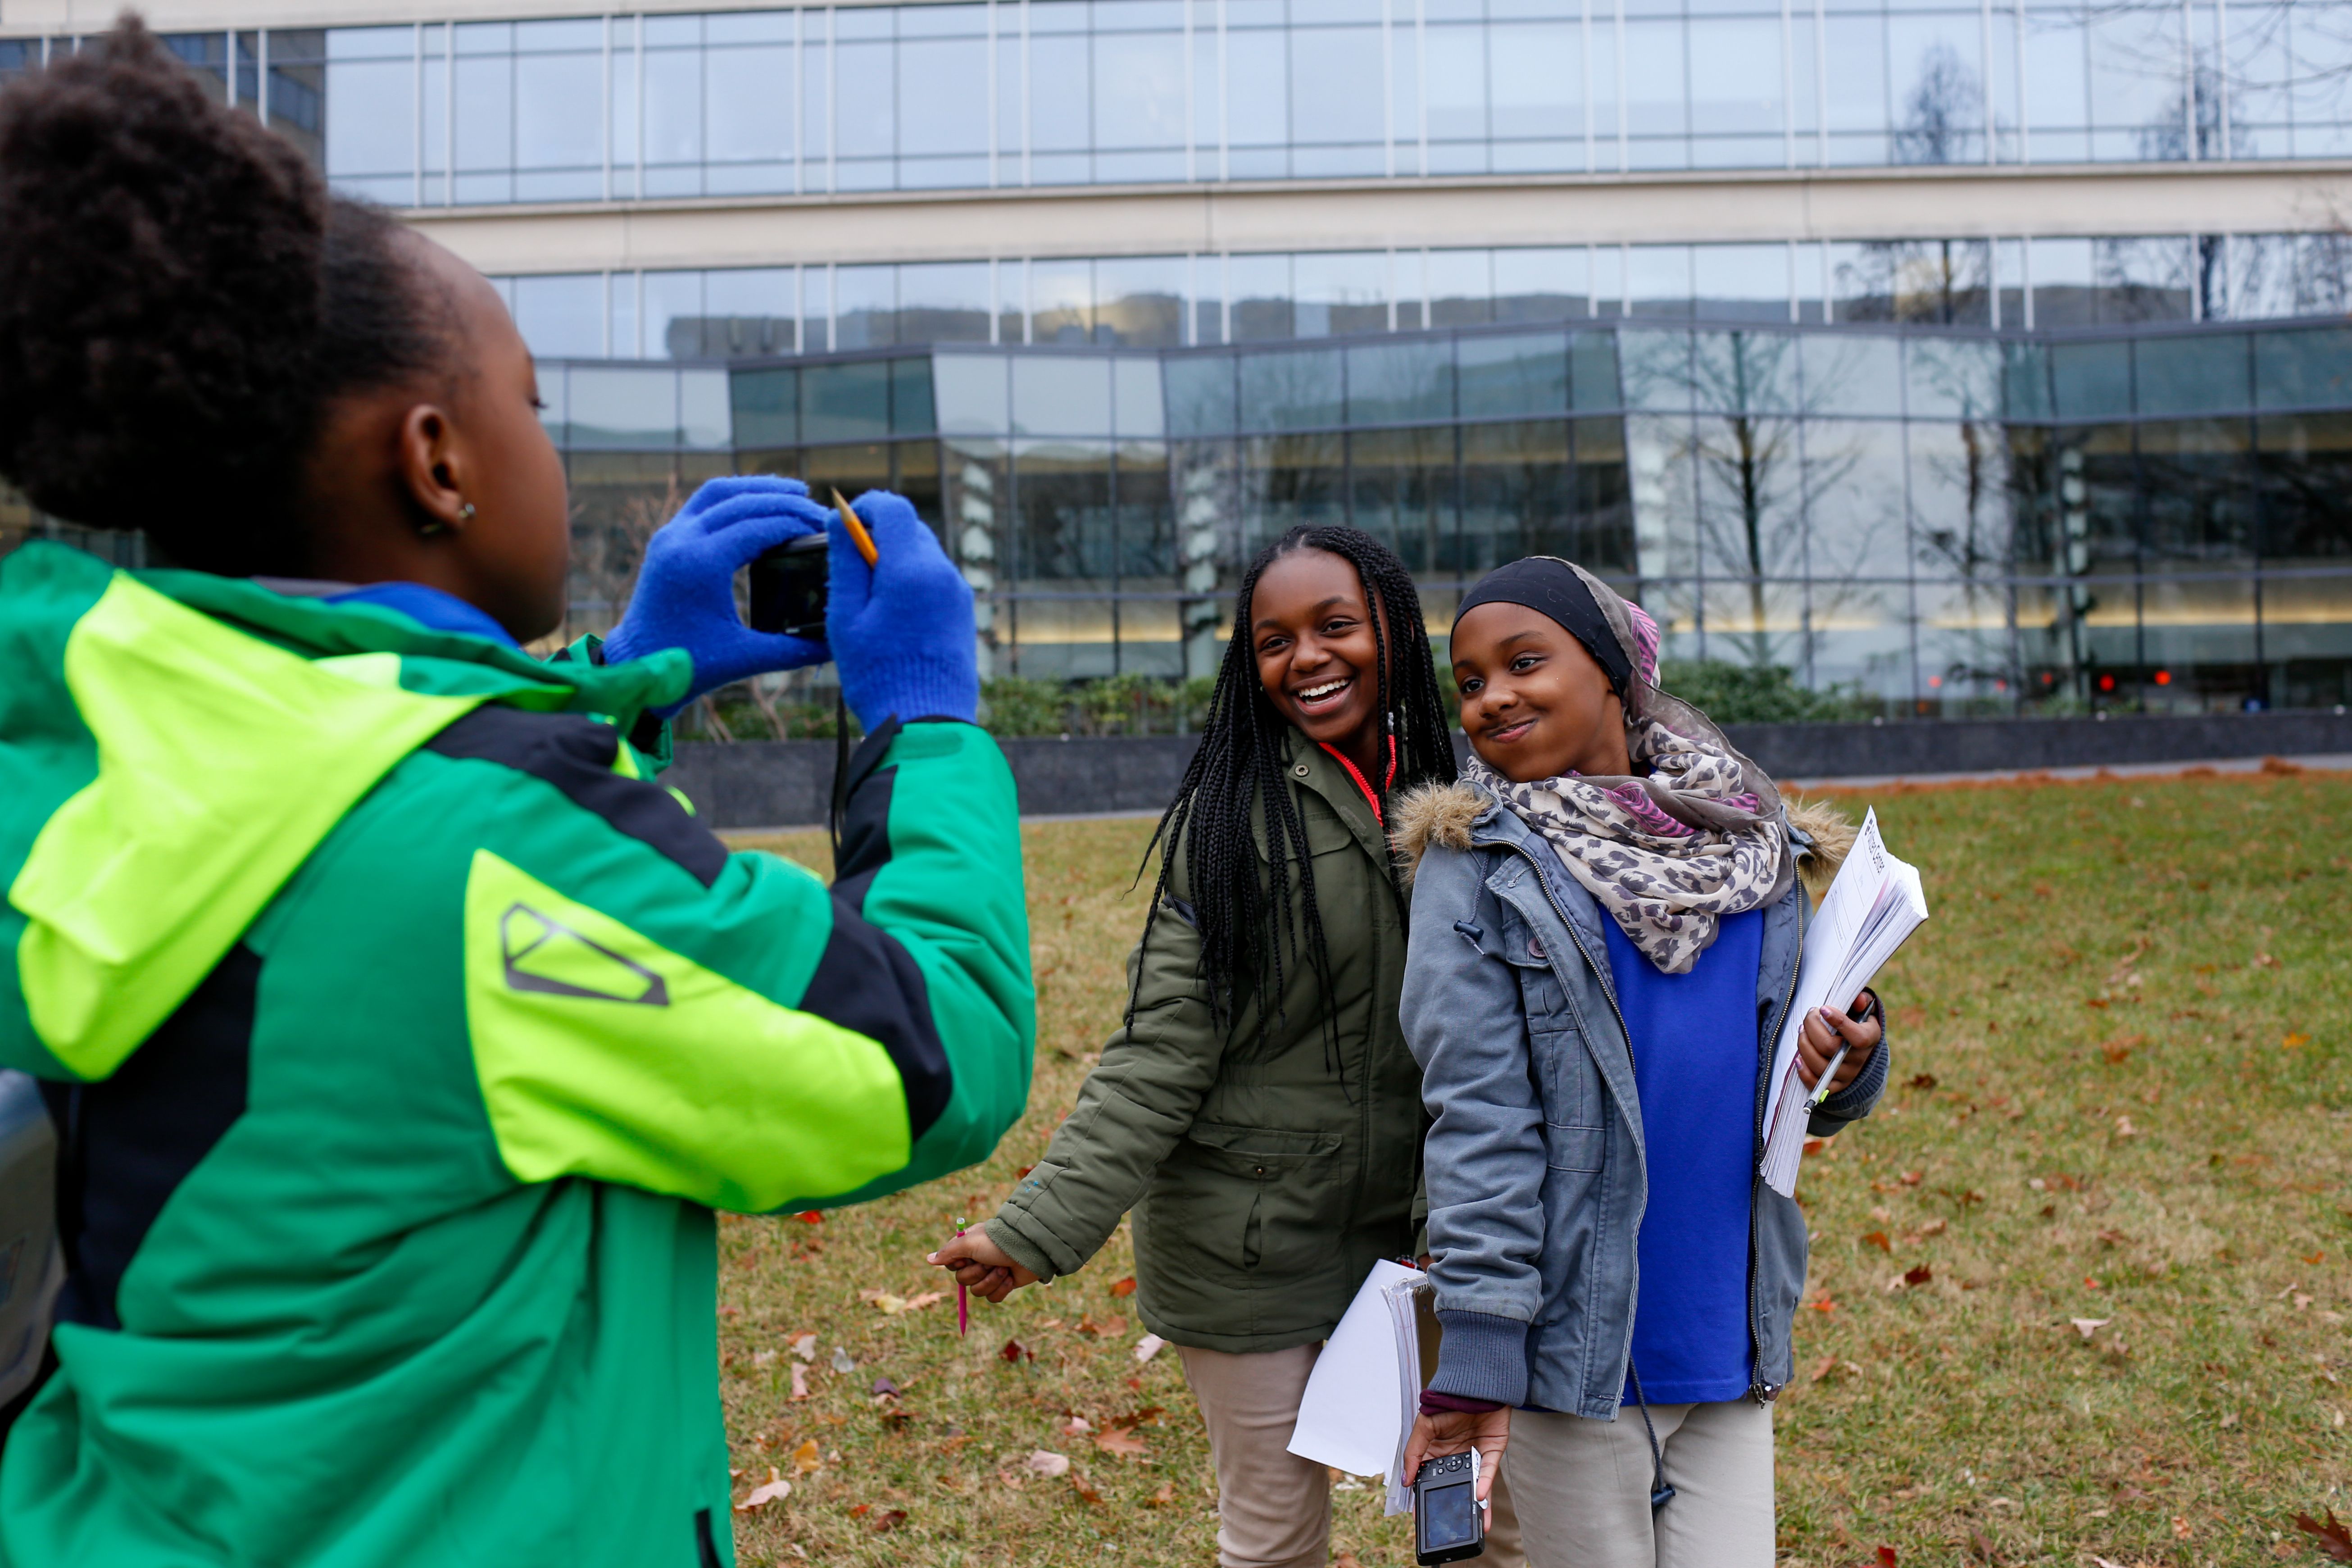 Washington Global students practice photography techniques with one another while preparing to Walk Like a Journalist. Image by Eslah Attar. United States, 2017.